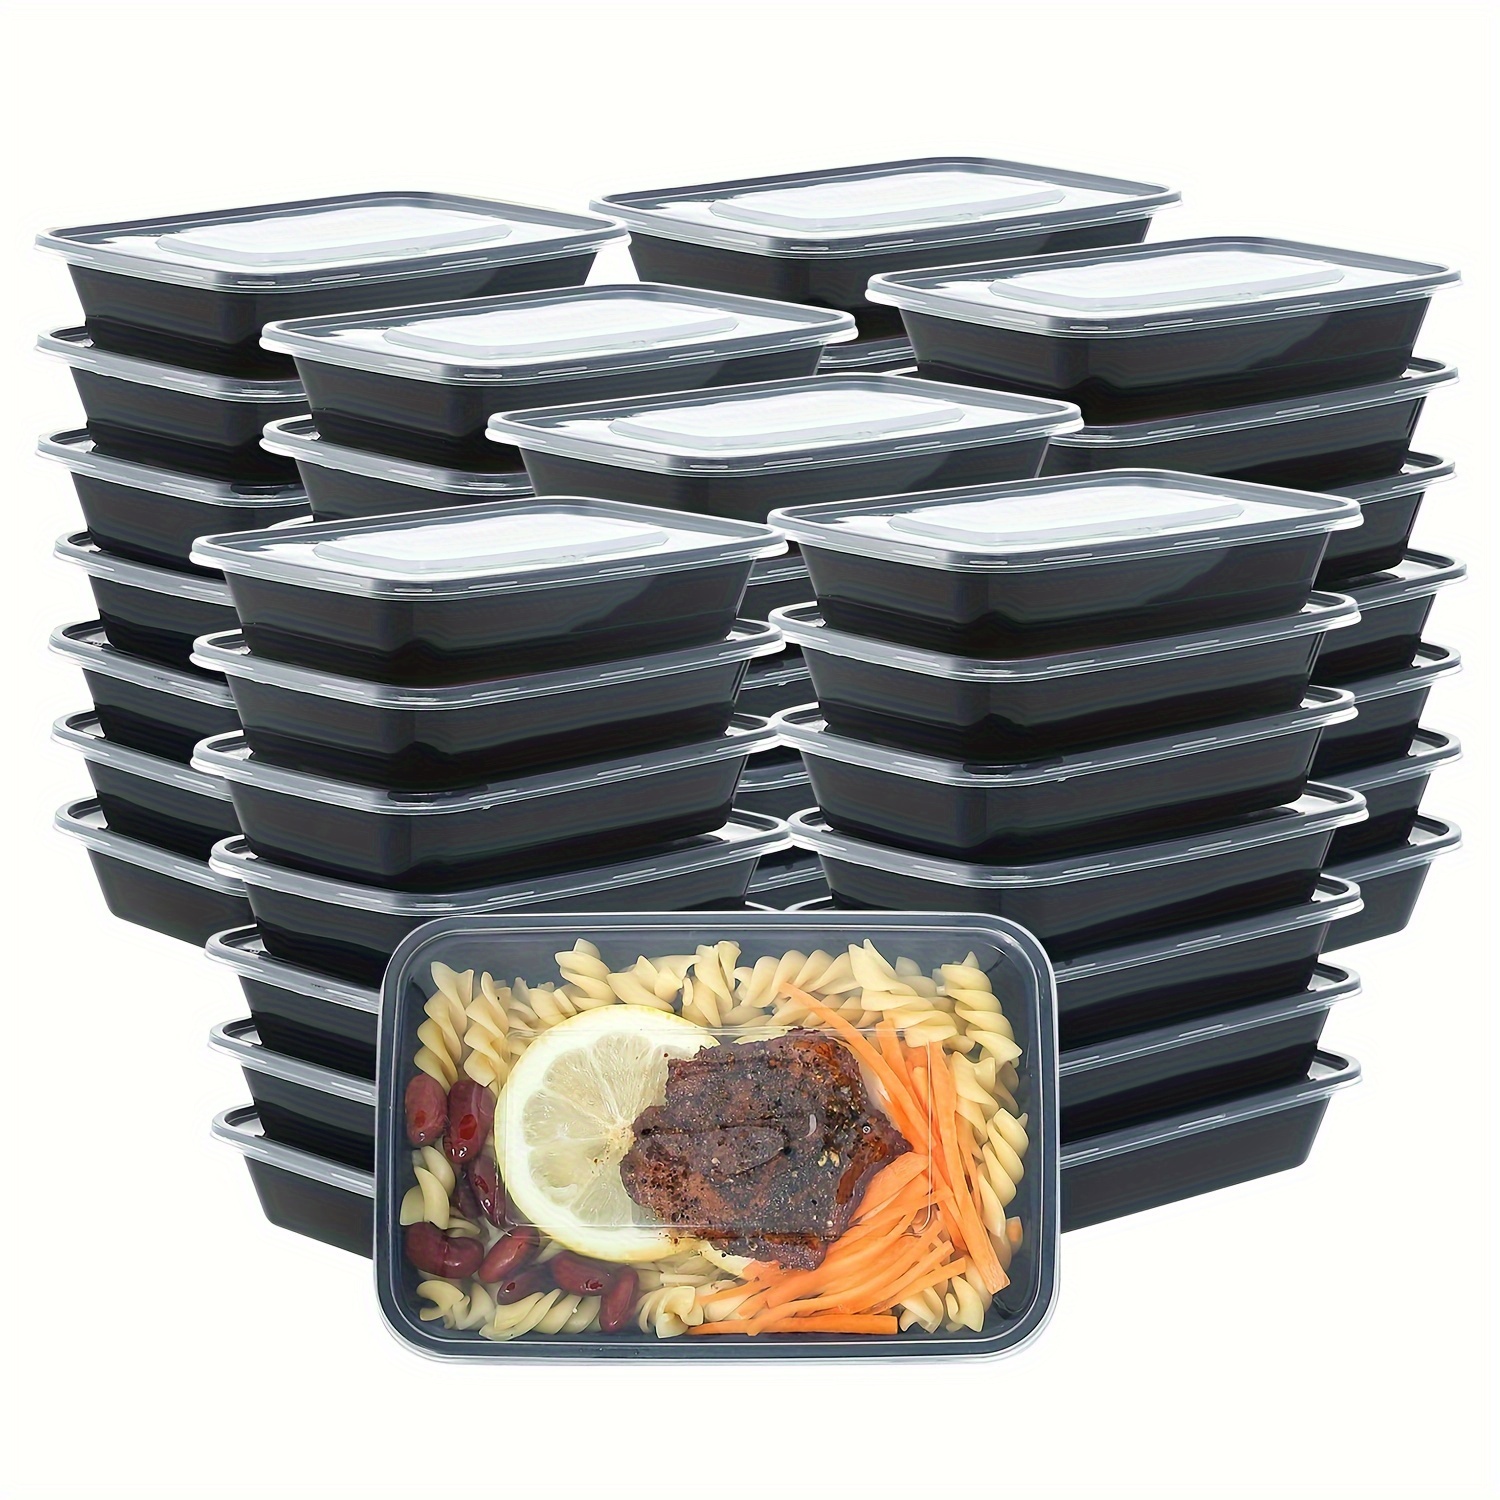 Kitch’nMore 38oz Meal Prep Containers, Extra Large &Thick, 2 Compartment with Lids,Food Storage Container,Reusable,Disposable,Stackable, Microwave